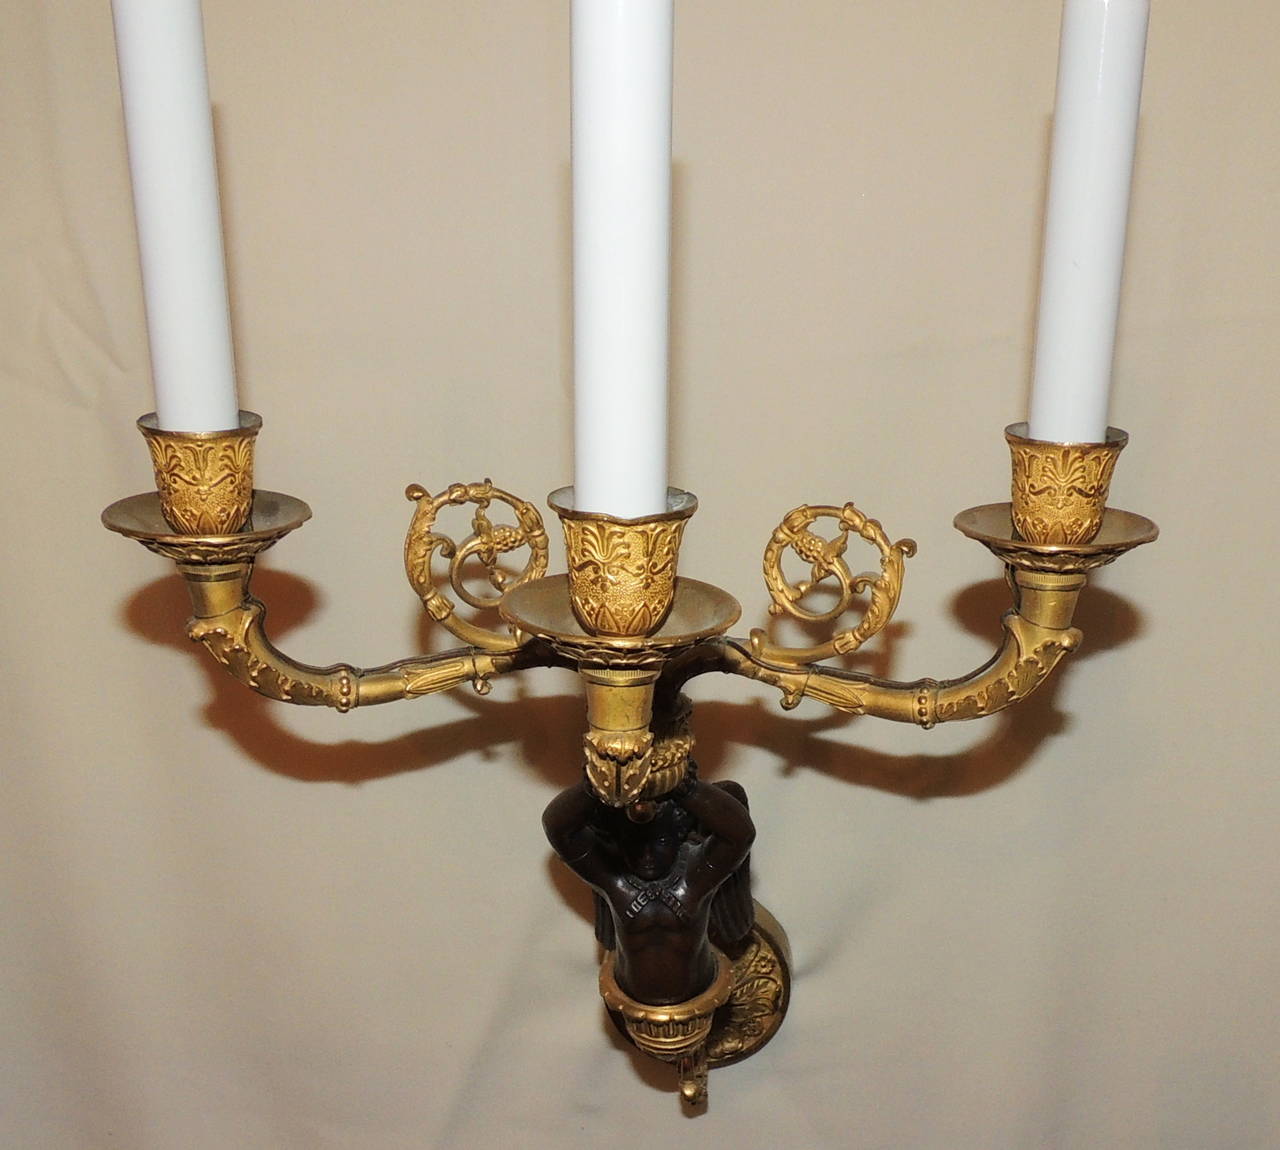 Early 20th Century Pair of French Doré Bronze and Patina Three-Arm Cherub or Putti Sconces